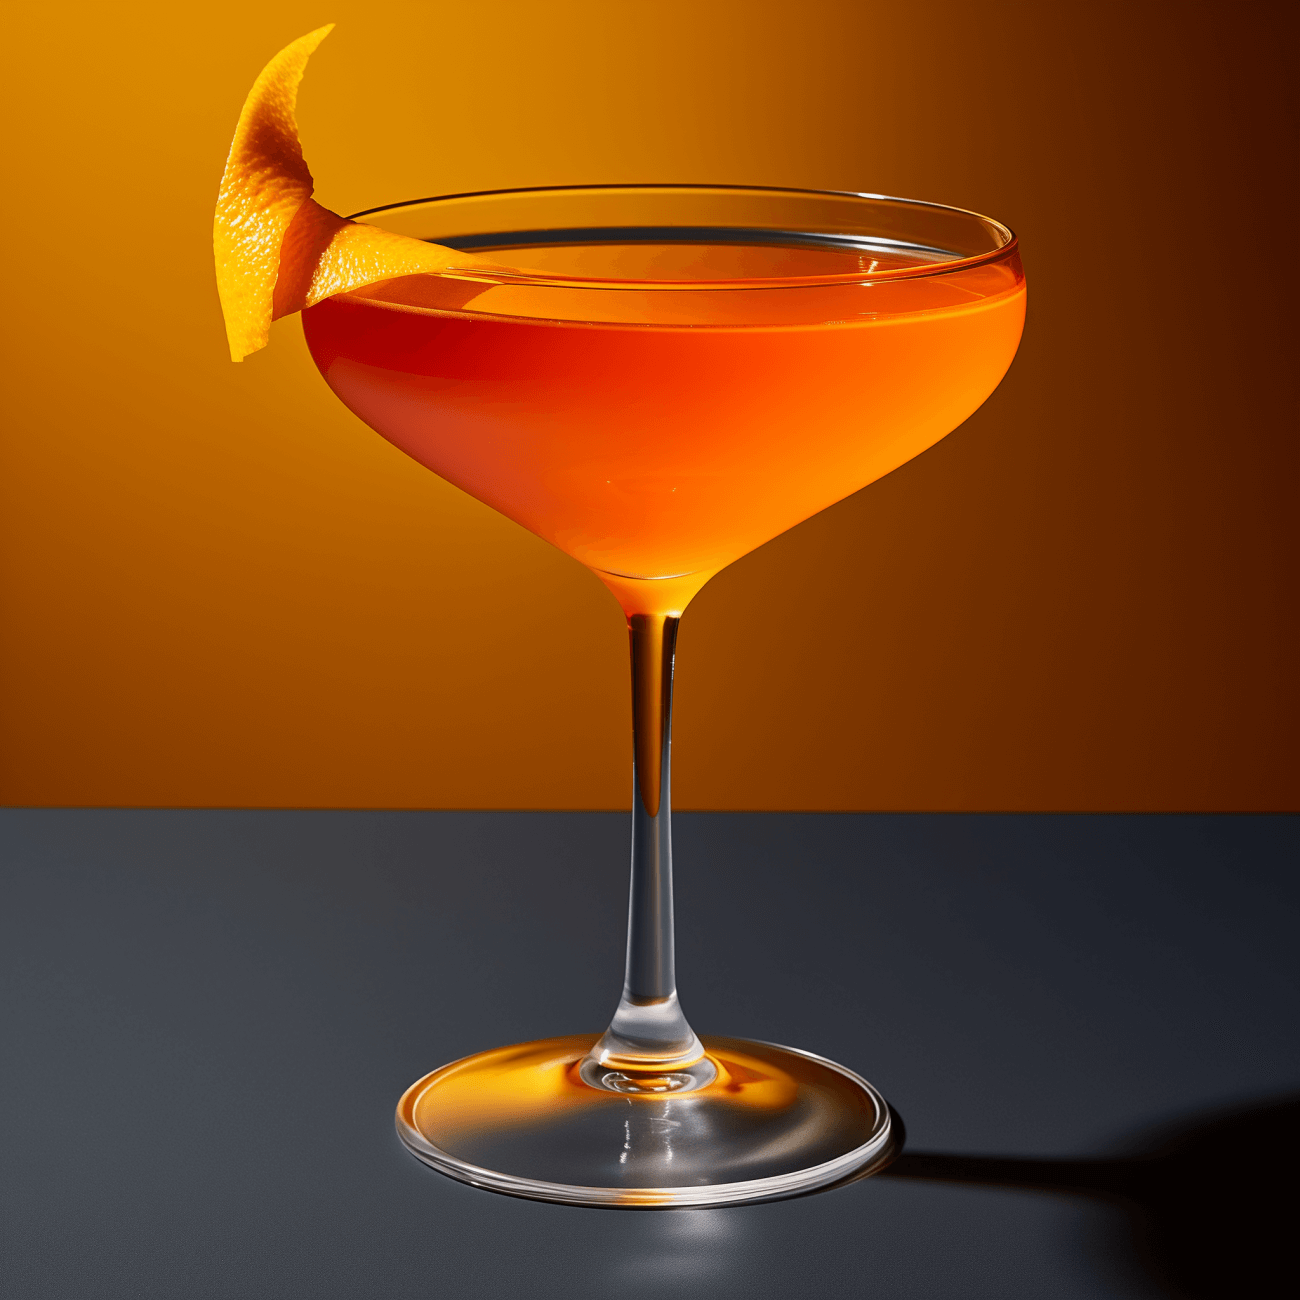 Eclipse Cocktail Recipe - The Eclipse cocktail is a harmonious blend of sweet, sour, and smoky flavors. The añejo tequila provides a rich, oaky base, while the Aperol adds a touch of bitterness. The Heering cherry liqueur imparts a sweet, fruity note, and the lemon juice brings a refreshing tang. The mezcal, although used sparingly, adds a distinctive smoky flavor that lingers on the palate.